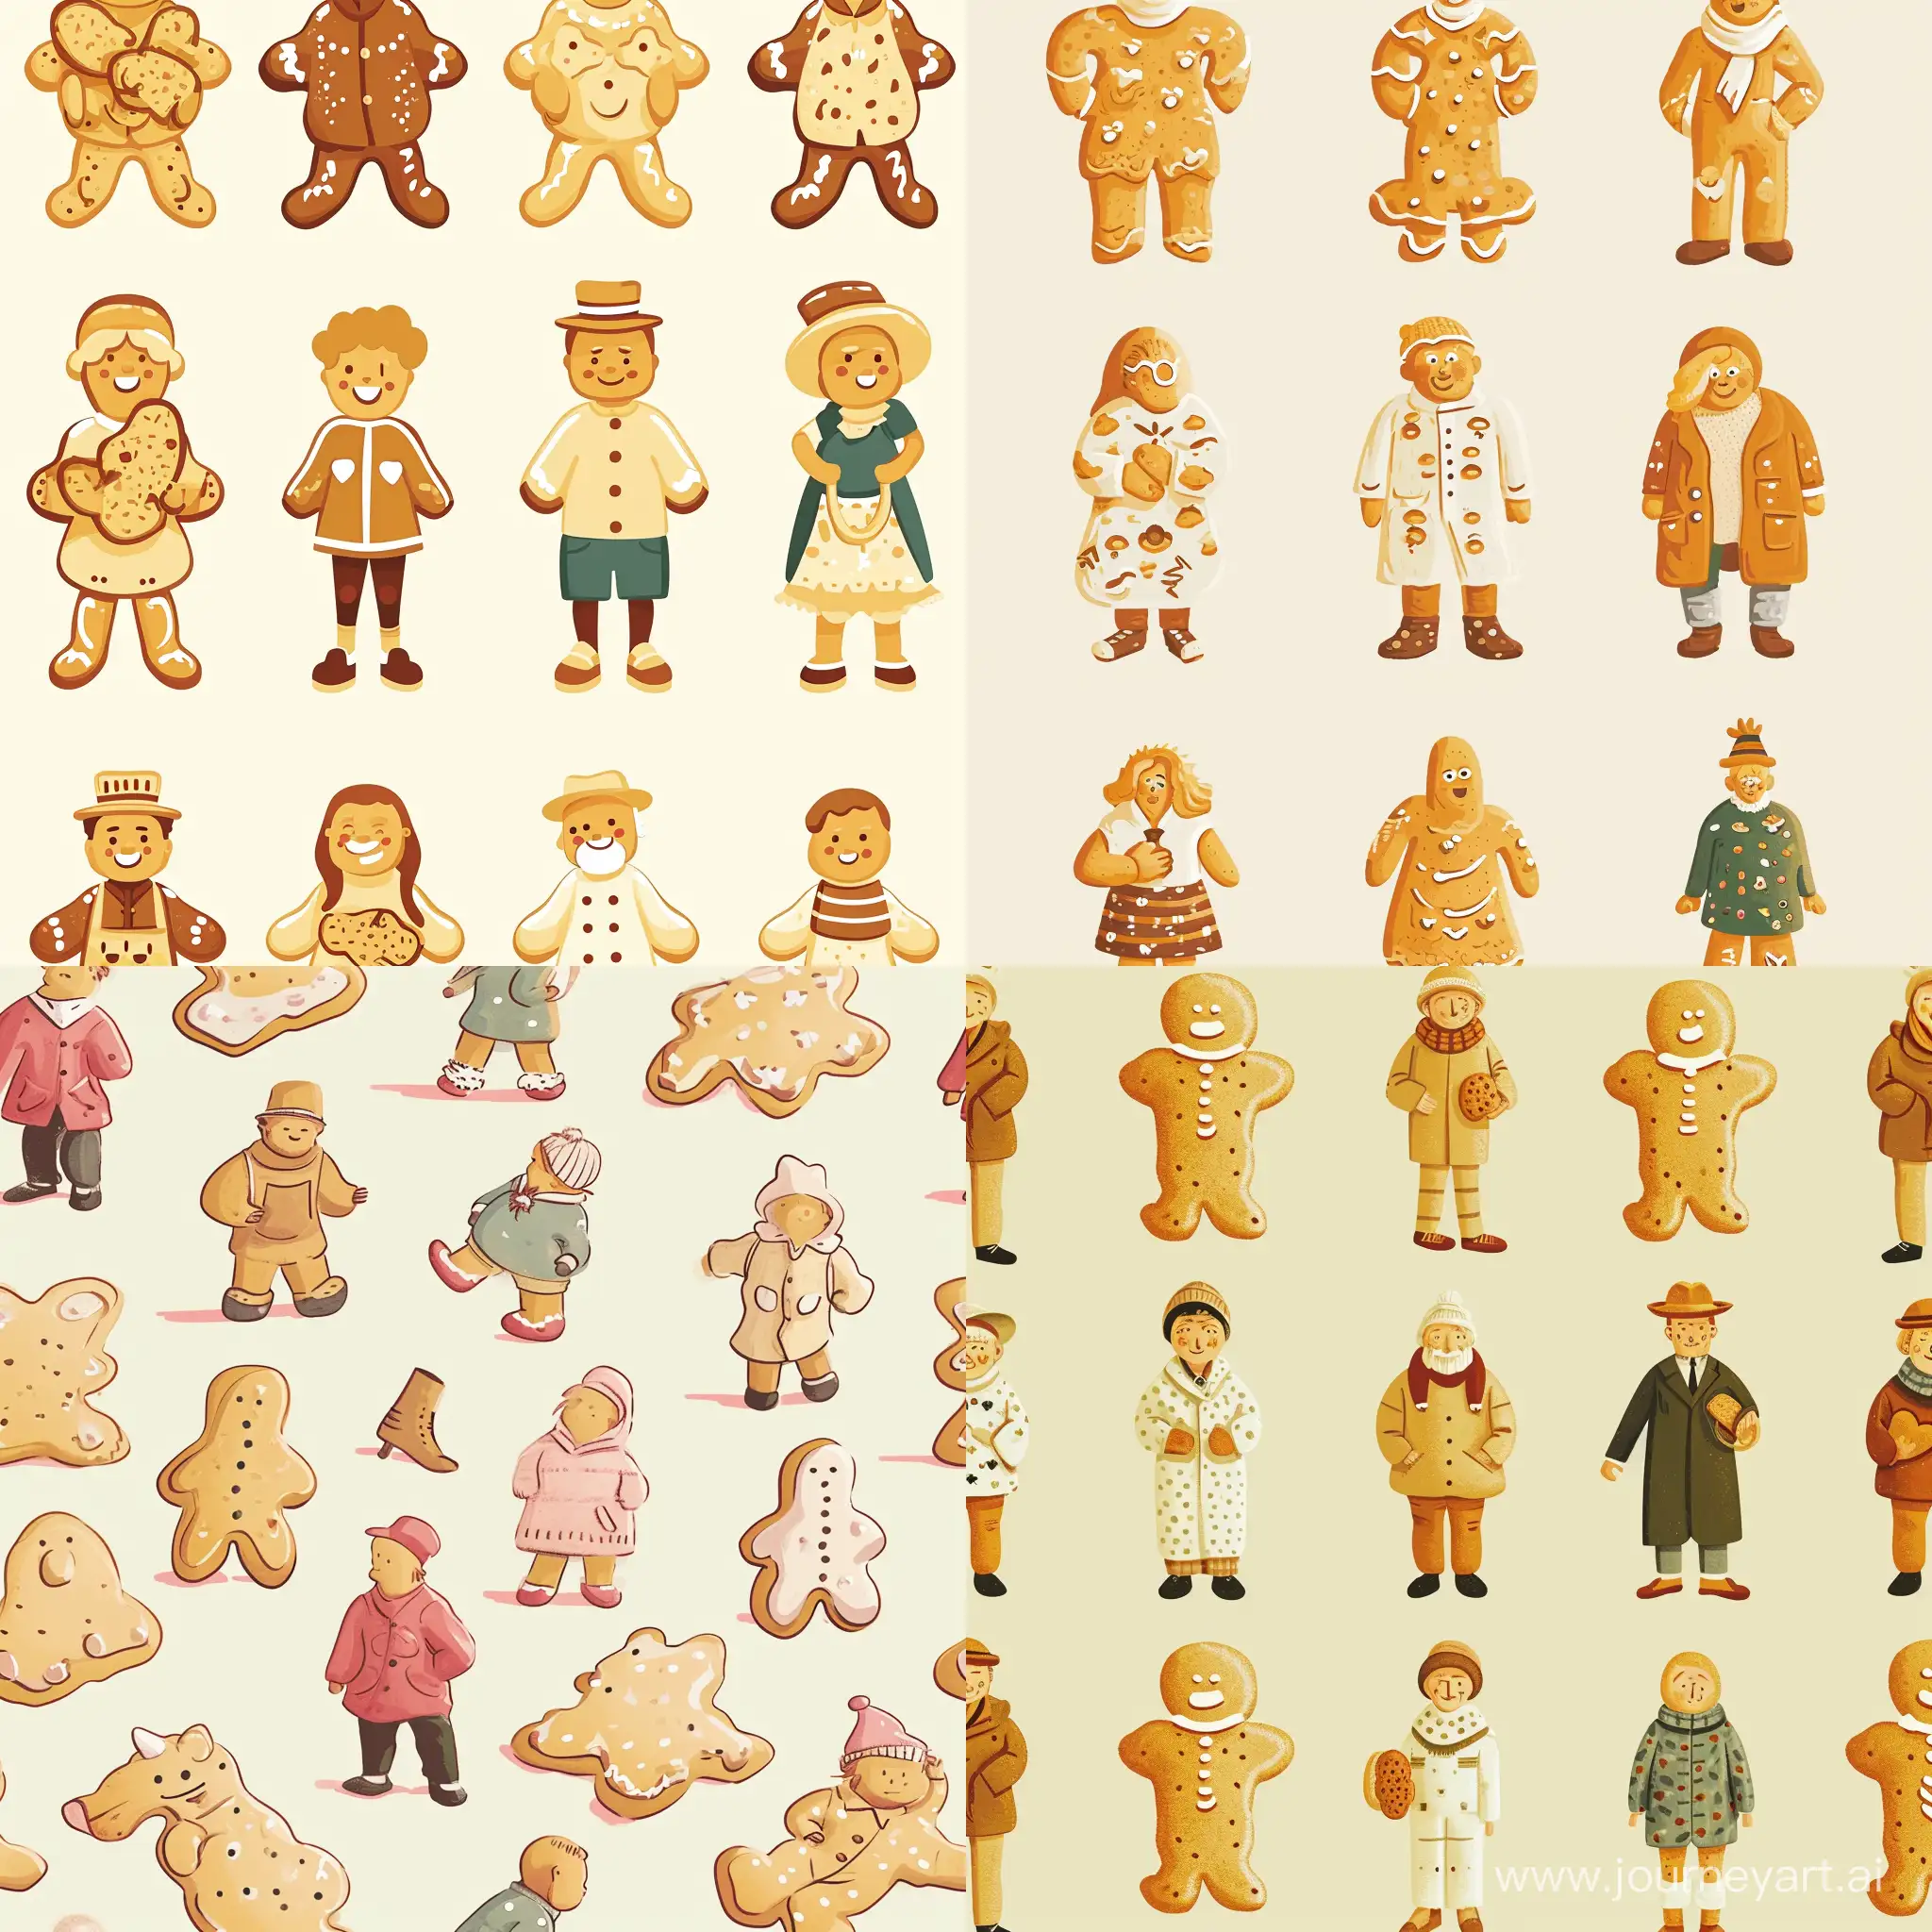 Adorable-Anthropomorphic-Cookie-Characters-in-Various-Outfits-and-Shoes